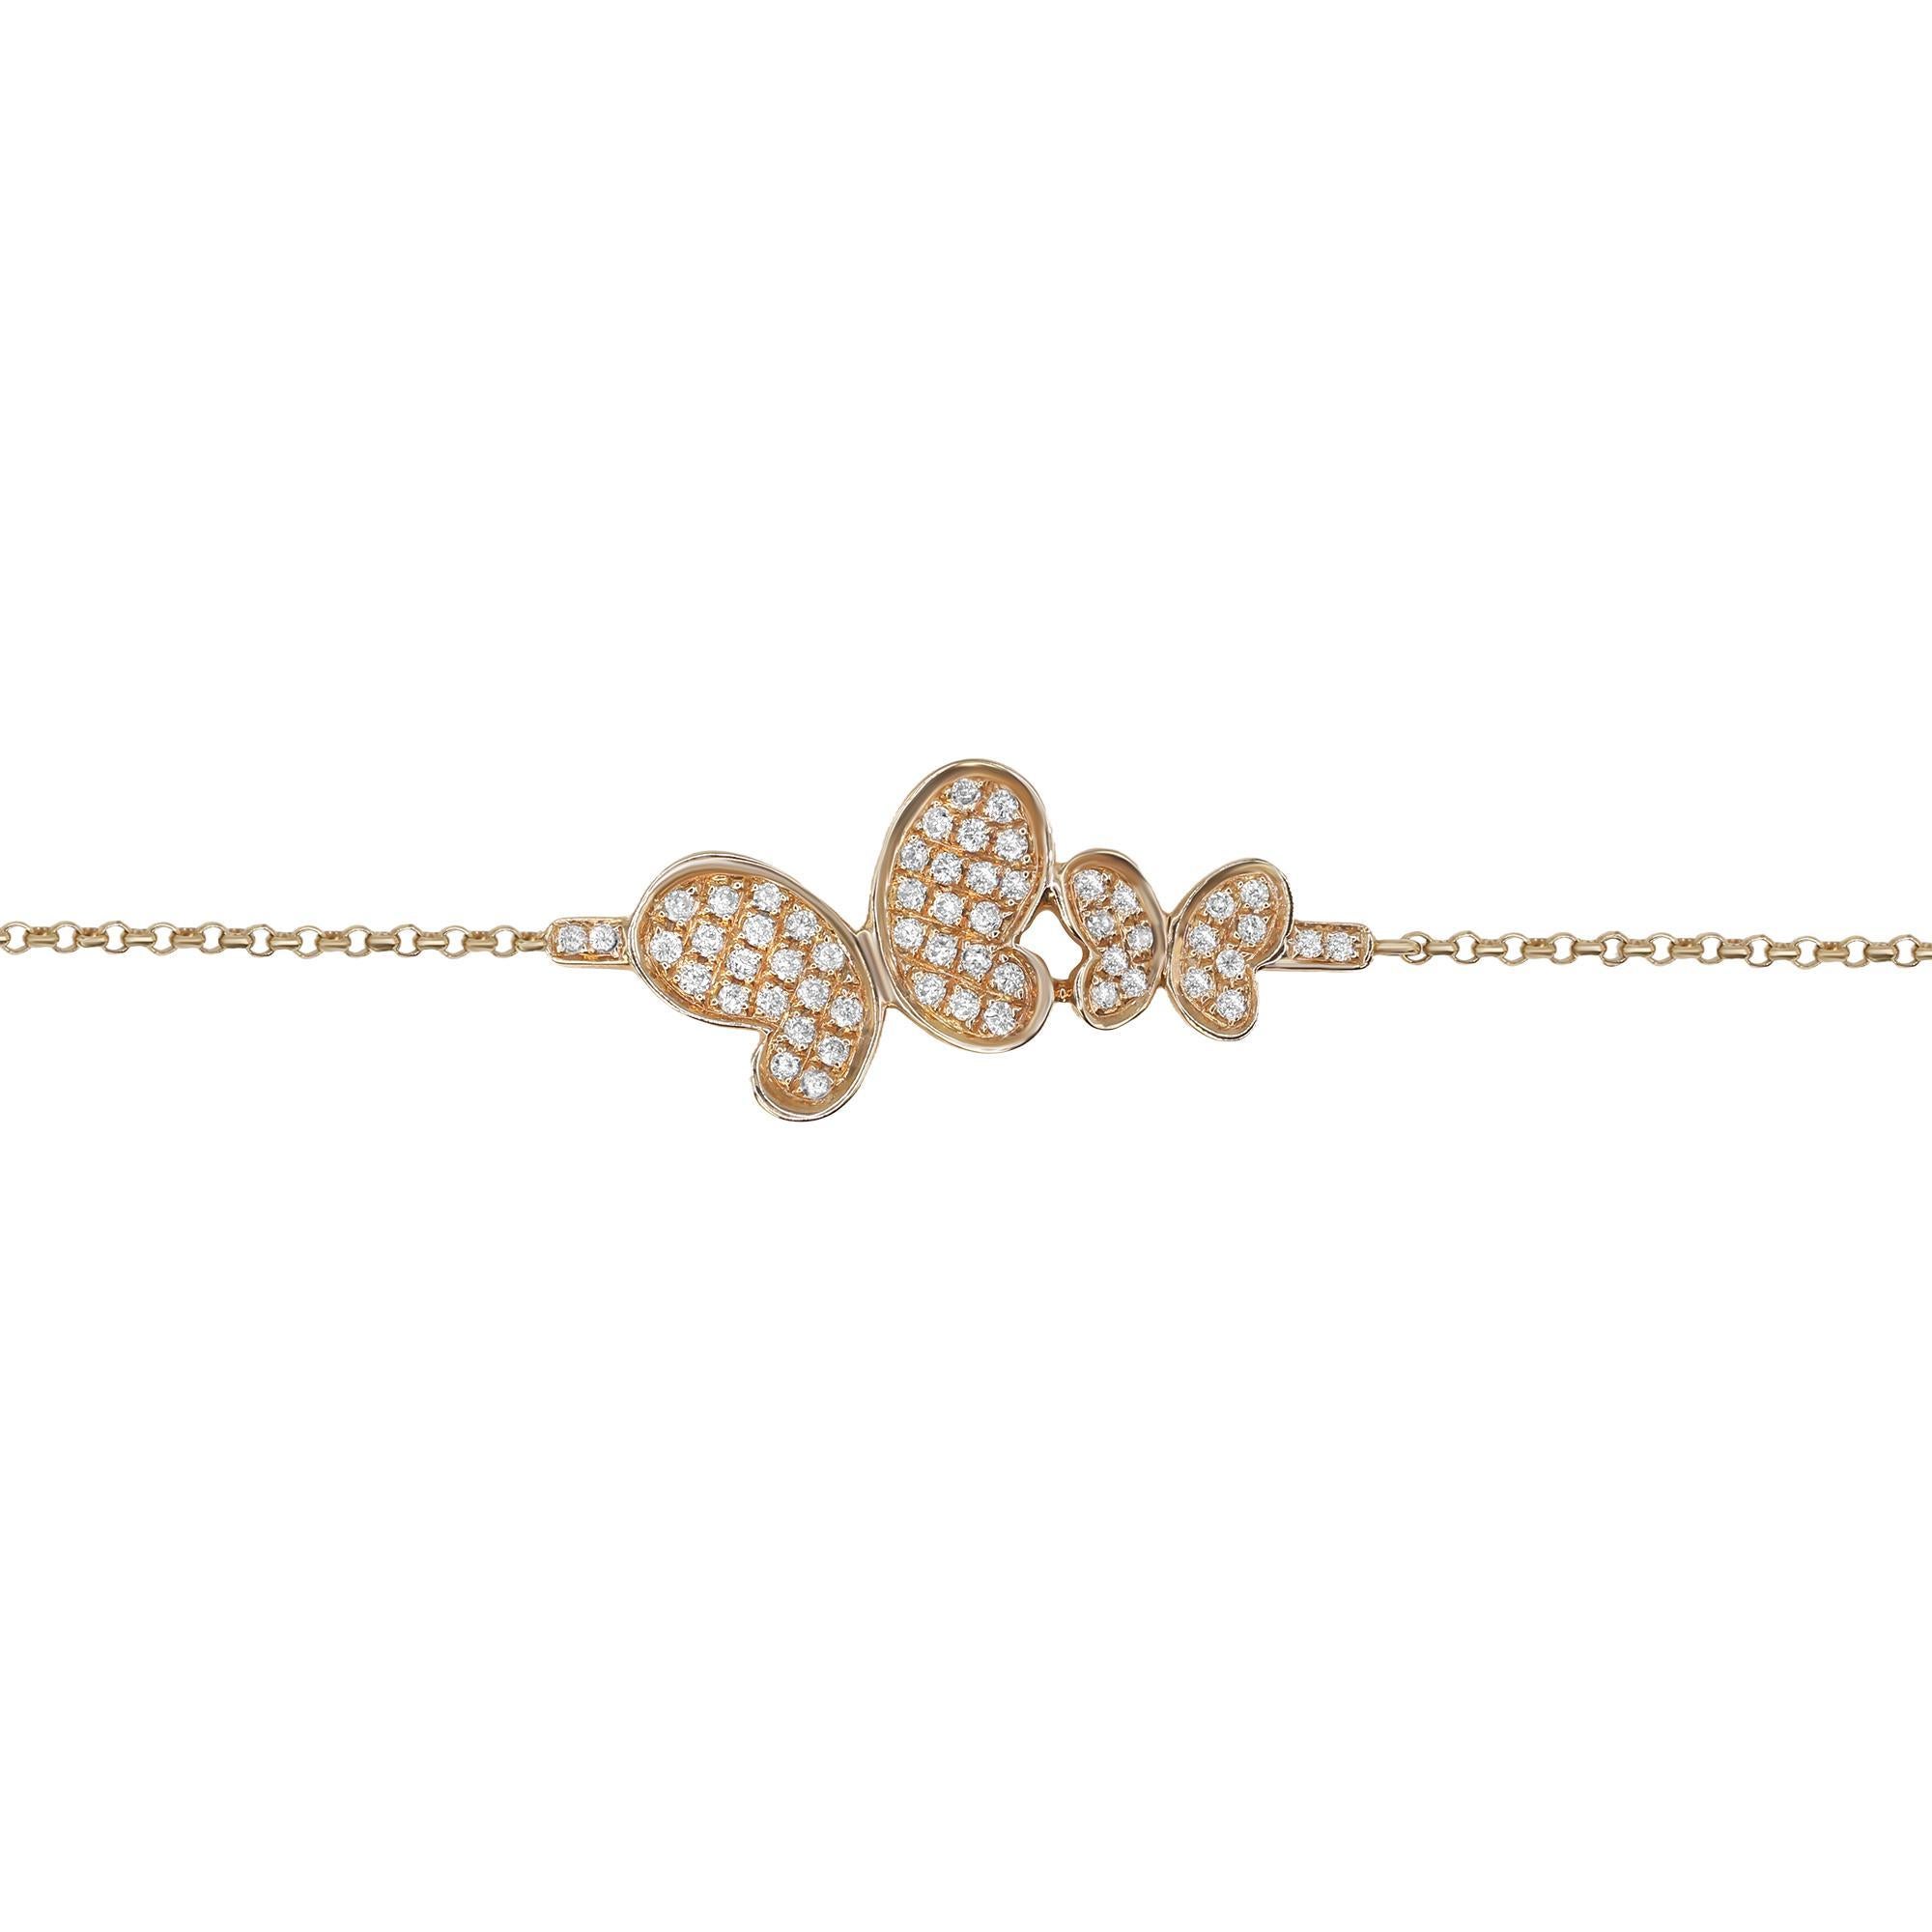 Butterflies are deep & powerful representations of life. Shop our special two diamond Butterfly chain bracelet  in 18k rose gold. This piece features 0.36cttw of round cut diamonds. Diamond color I and SI-I clarity. Length: 7.25 inches. Adjustable